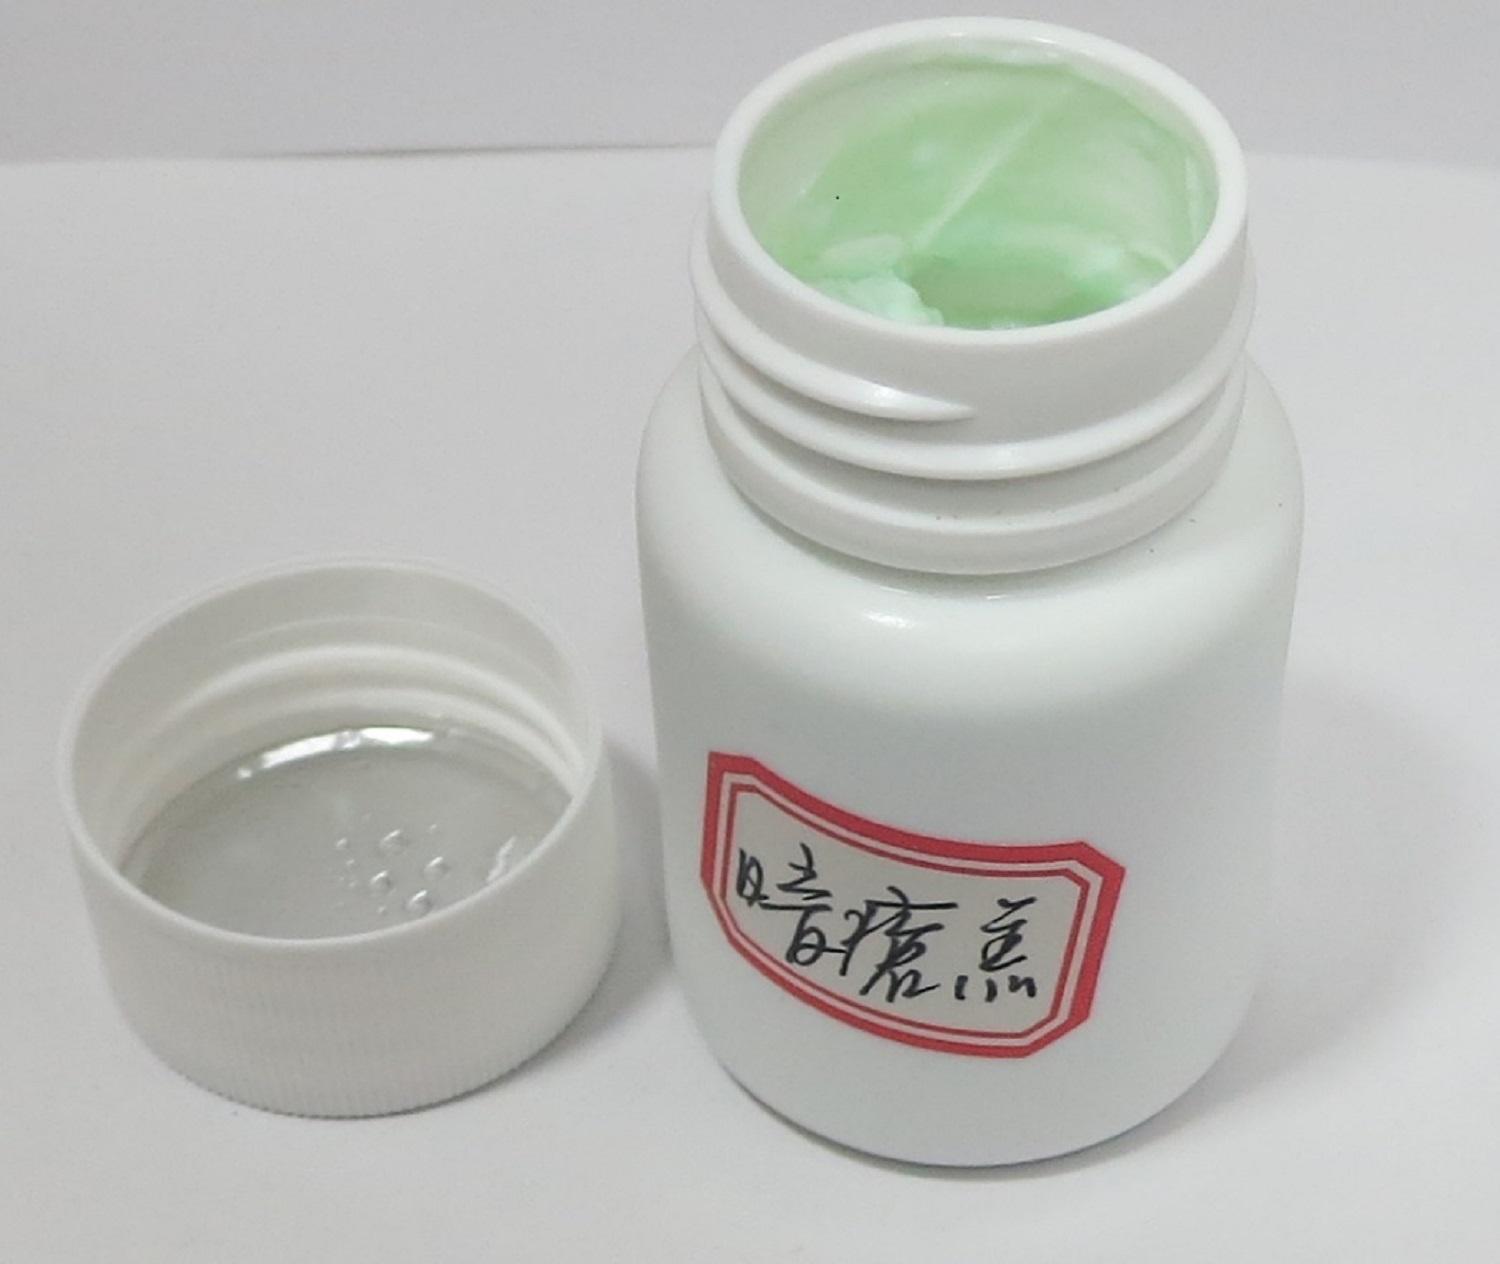 The Department of Health today (July 27) urged members of the public who consulted a listed Chinese medicine practitioner, Au Yeung Wai-chi, practising at Room 1, 18/F, Wealthy Plaza, 138 Shau Kei Wan Road, Sai Wan Ho, to stop using a green cream product he prescribed as it was found to contain undeclared Western drug ingredients.